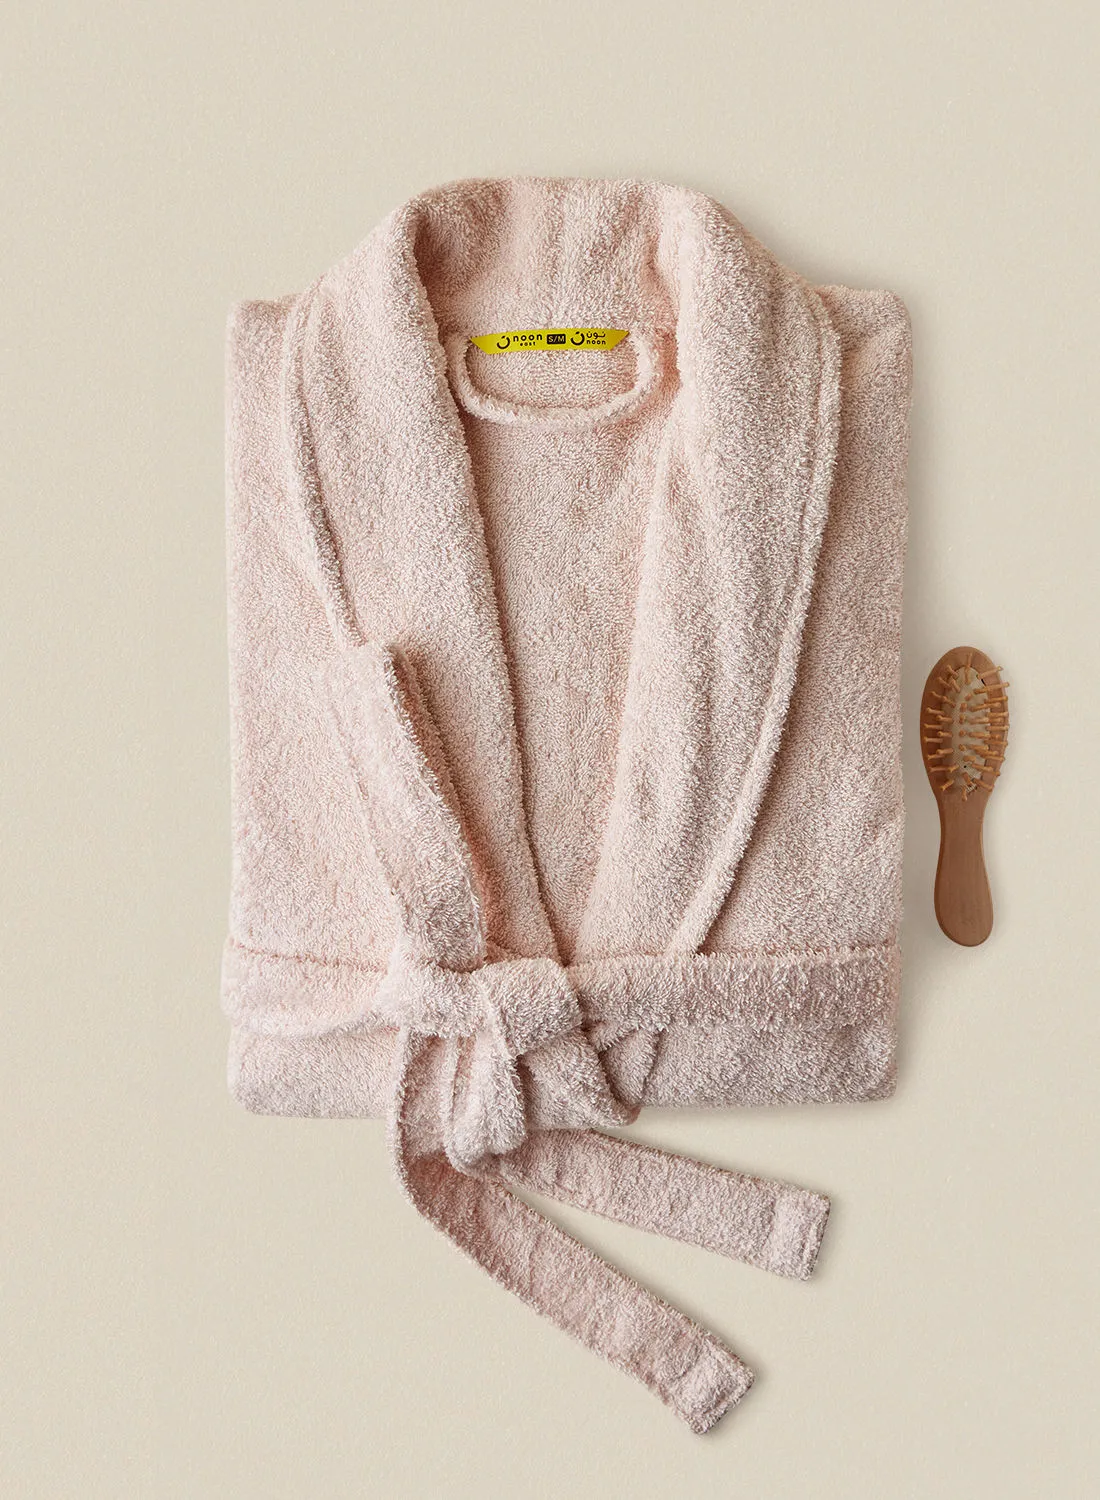 noon east Bathrobe - 380 GSM 100% Cotton Terry Silky Soft Spa Quality Comfort - Shawl Collar & Pocket - Peach Color - 1 Piece